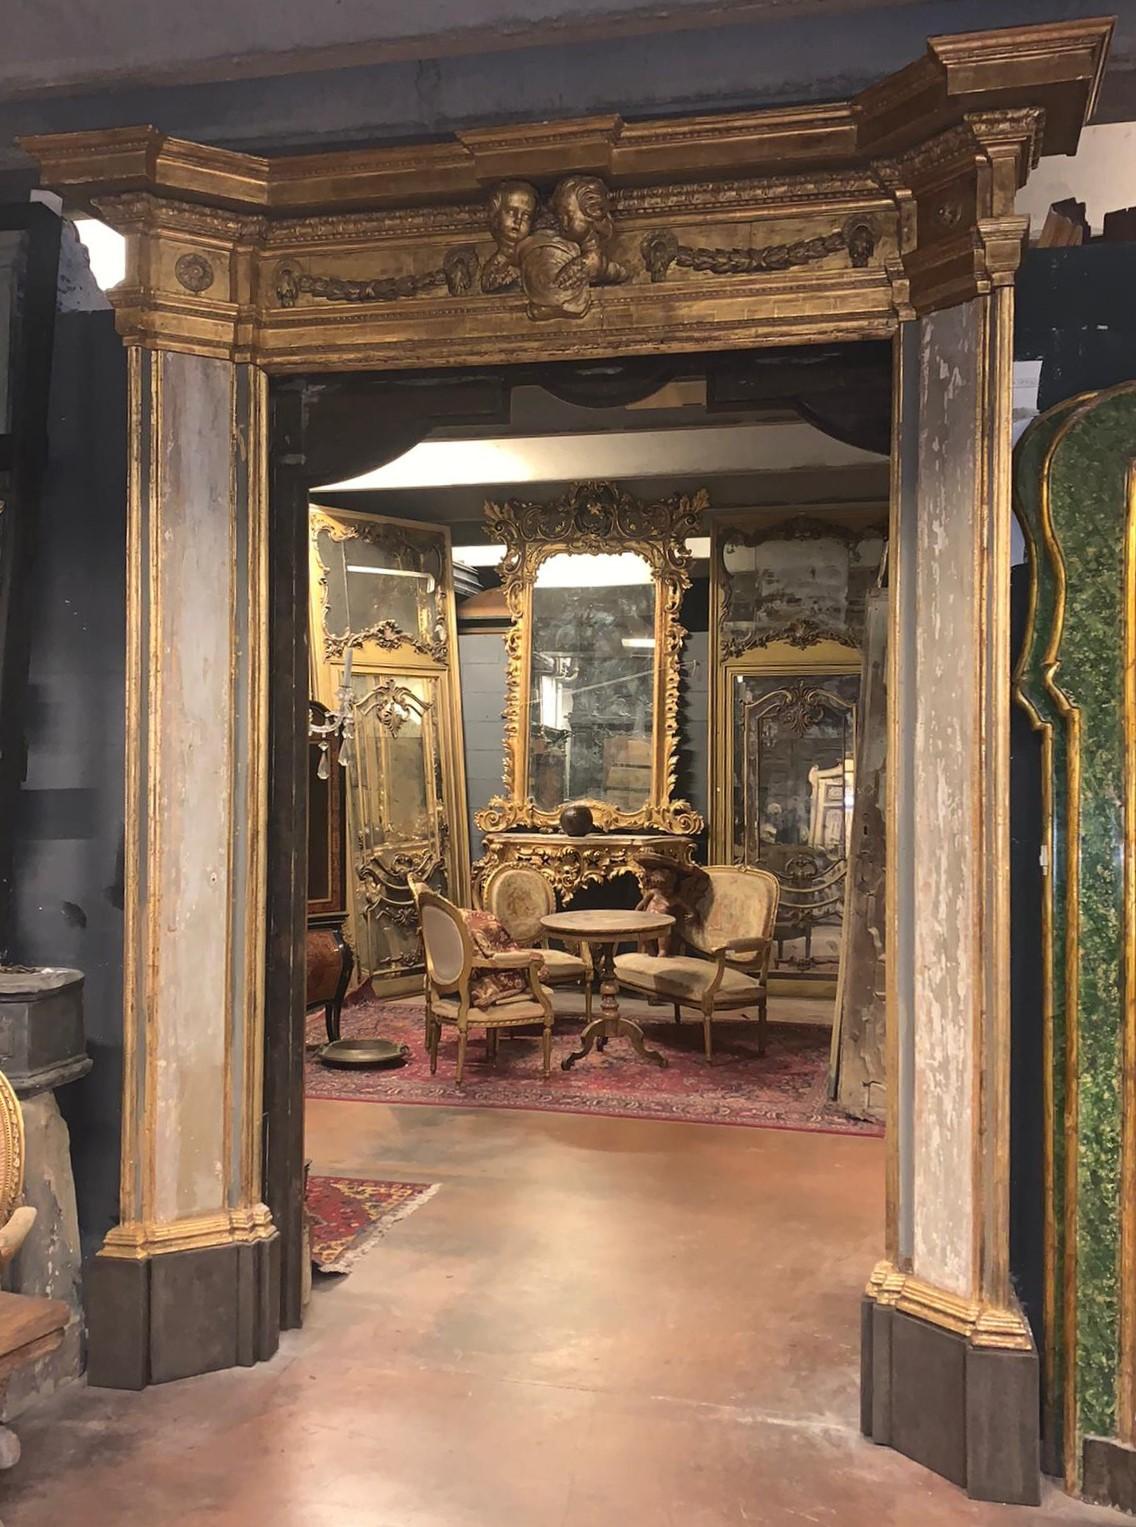 Ancient and important portal, of large dimensions, in richly lacquered and gilded wood carved by hand with cherubs and festoons, built in the middle of the 17th century in Italy
Very large and rich, of high age, ideal for furnishing or decorating a